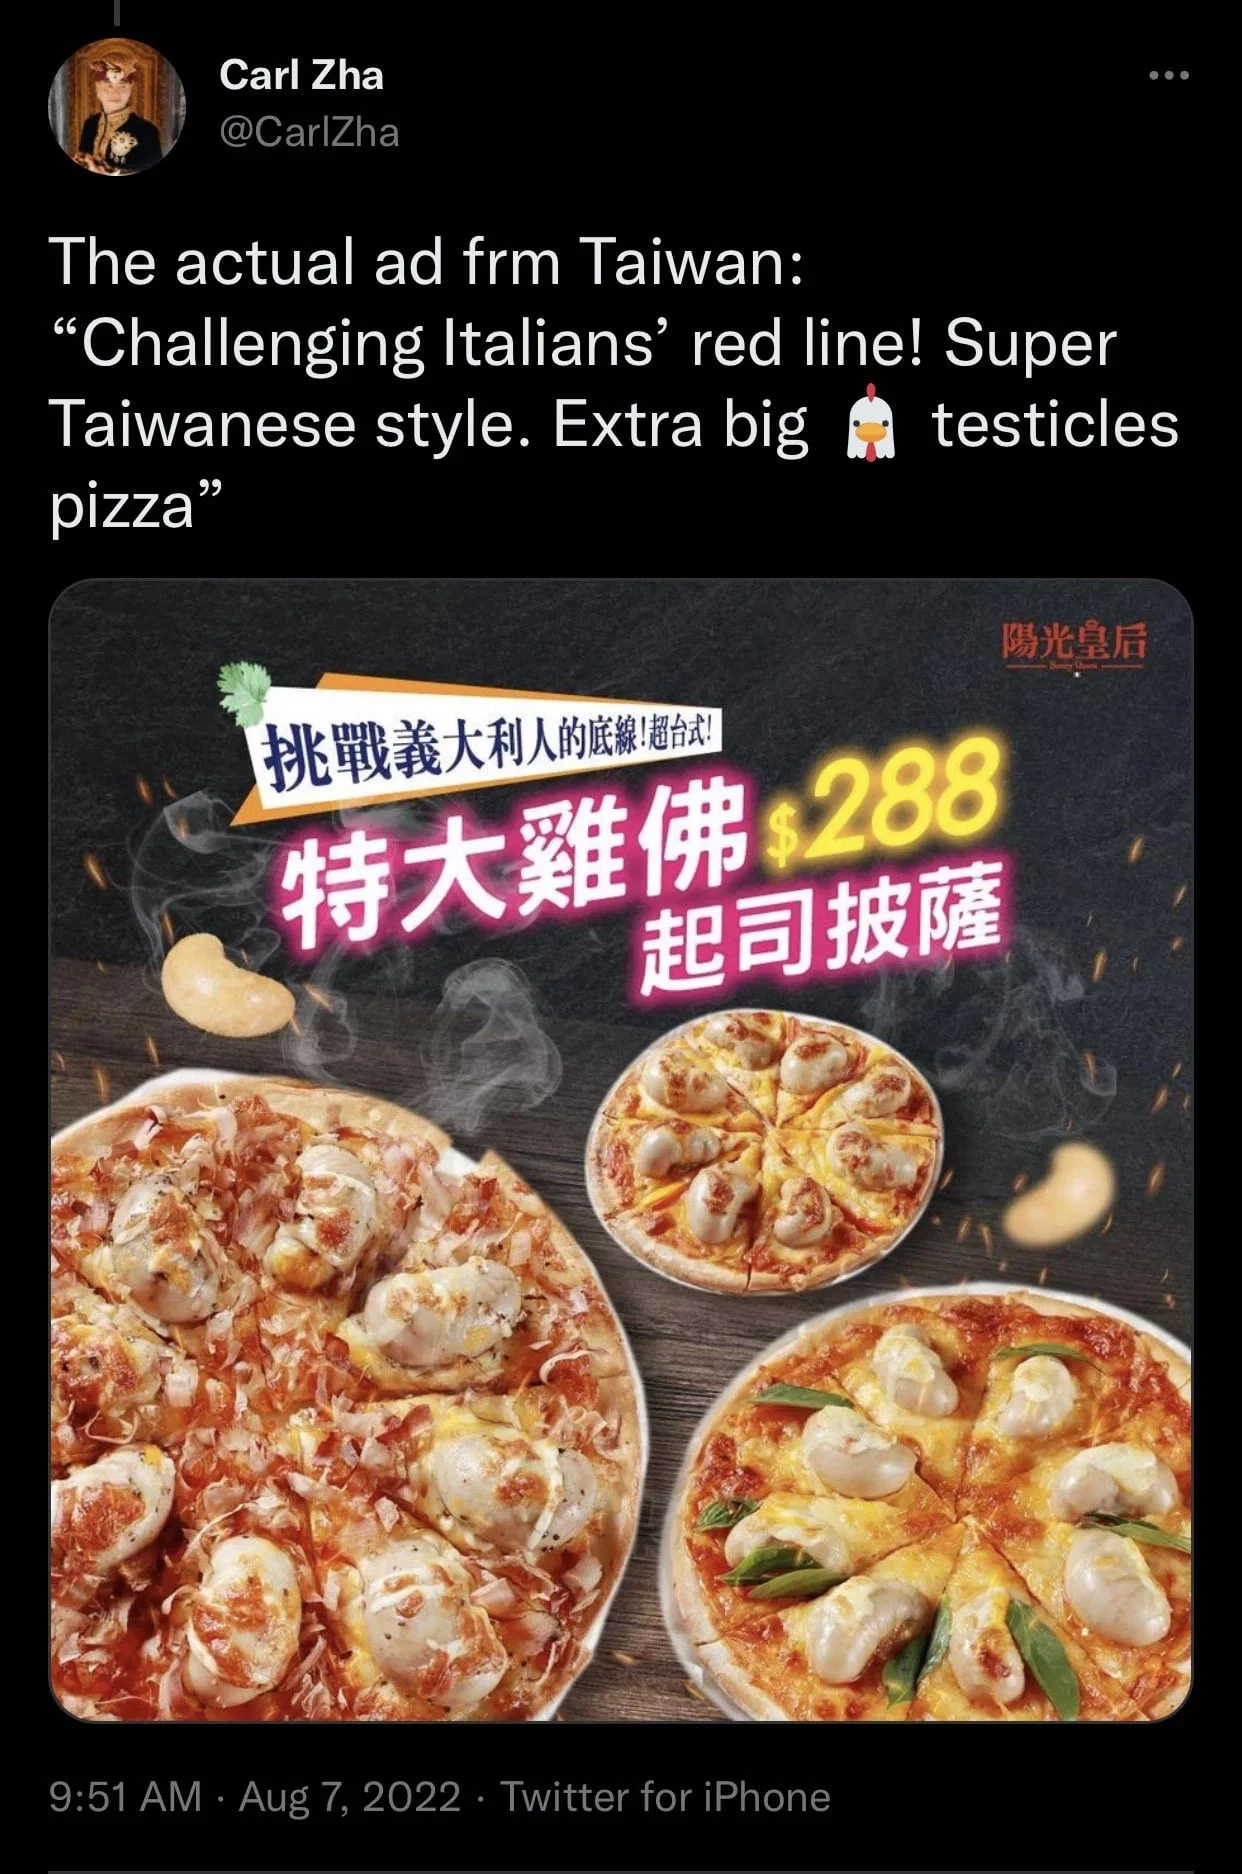 Chicken testicles pizza